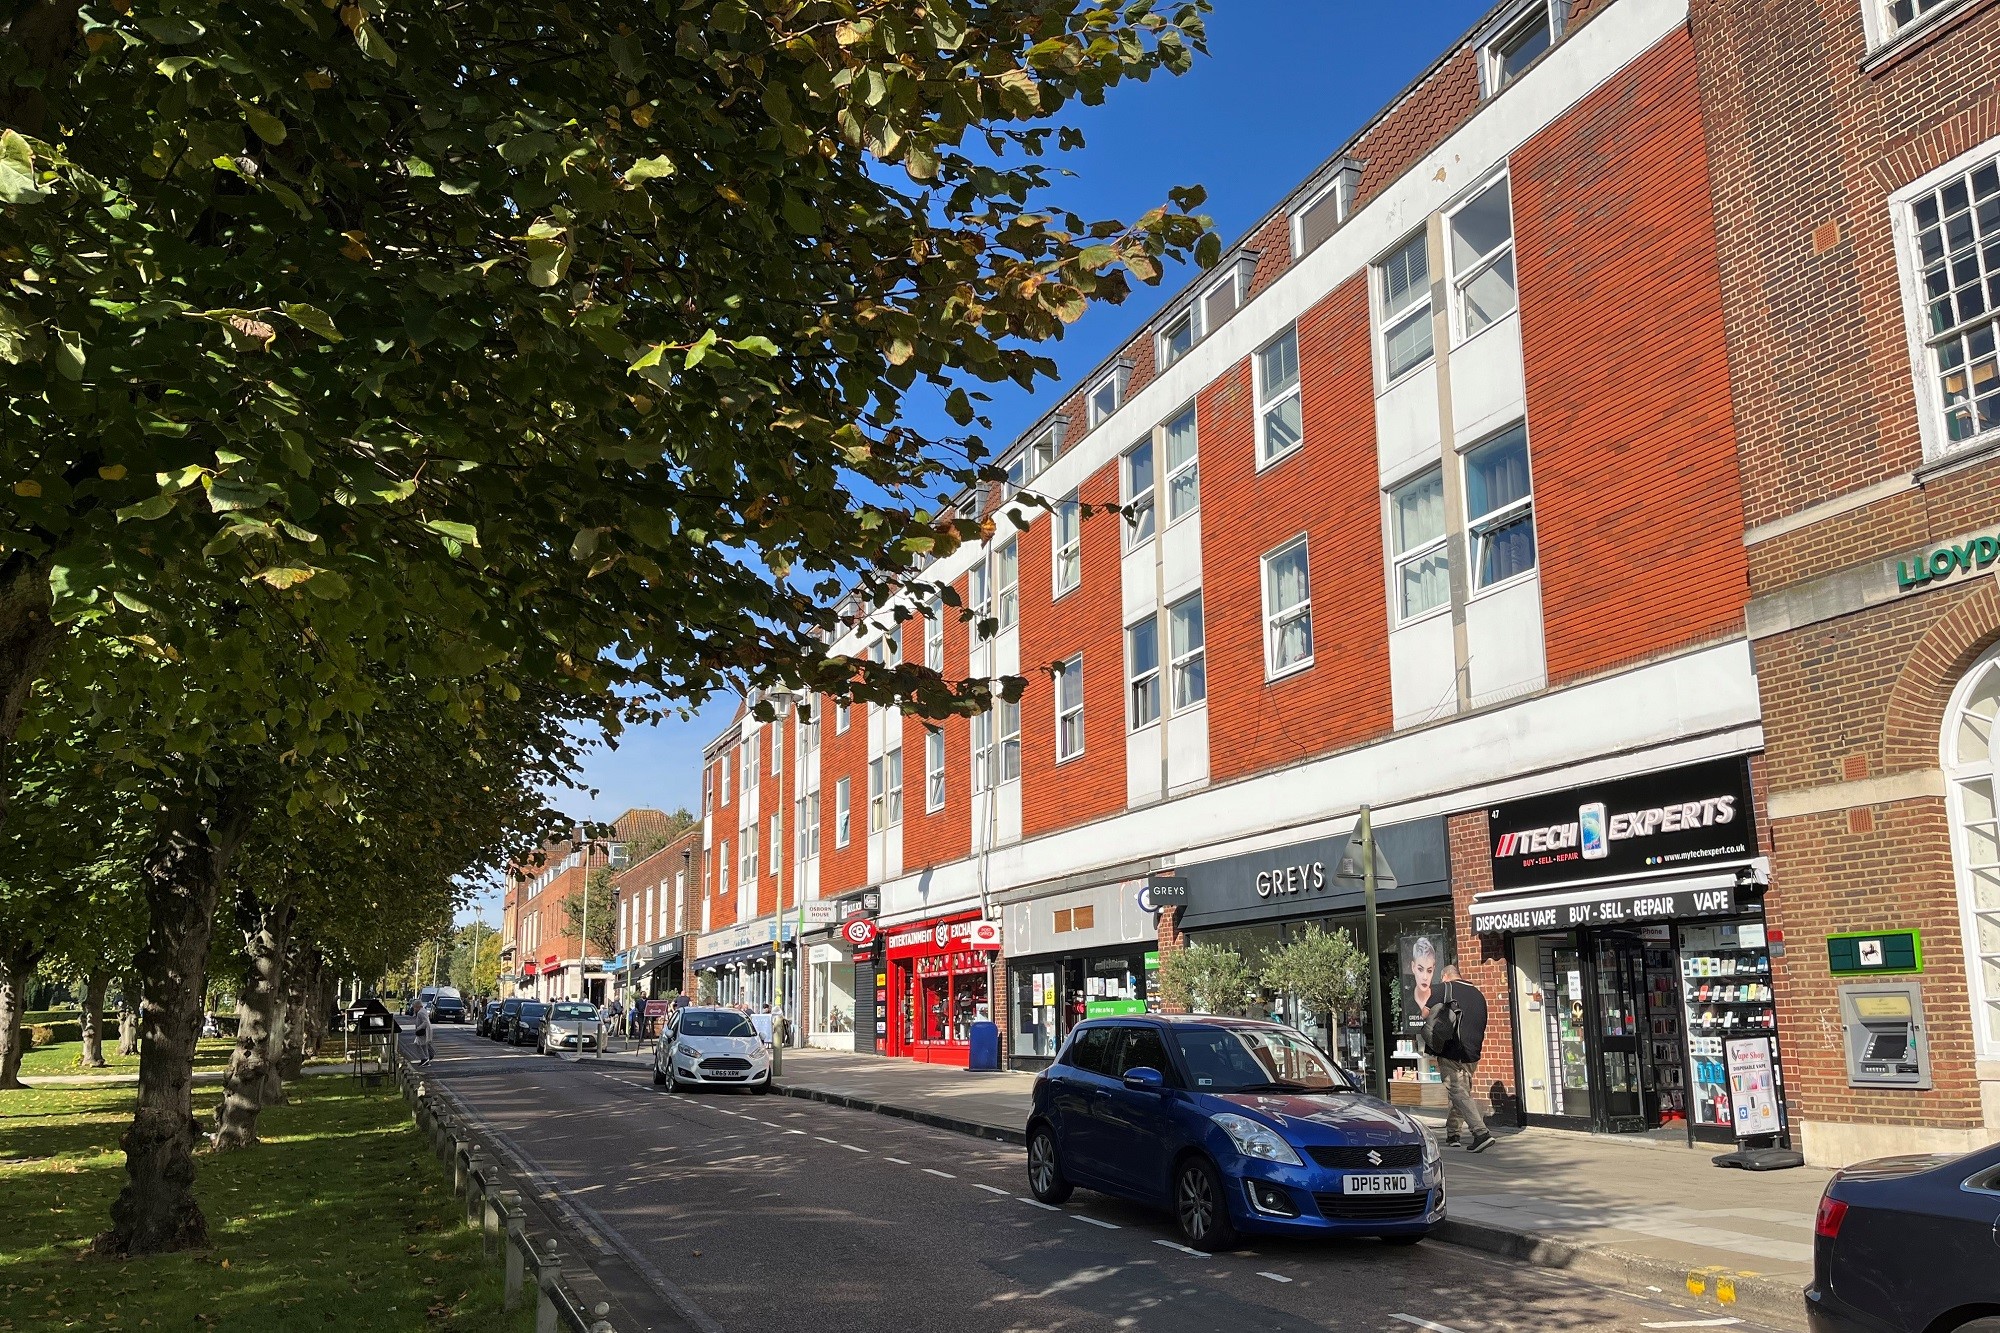 A street in wgc town centre where you can see cars parked on the side of the road and shops